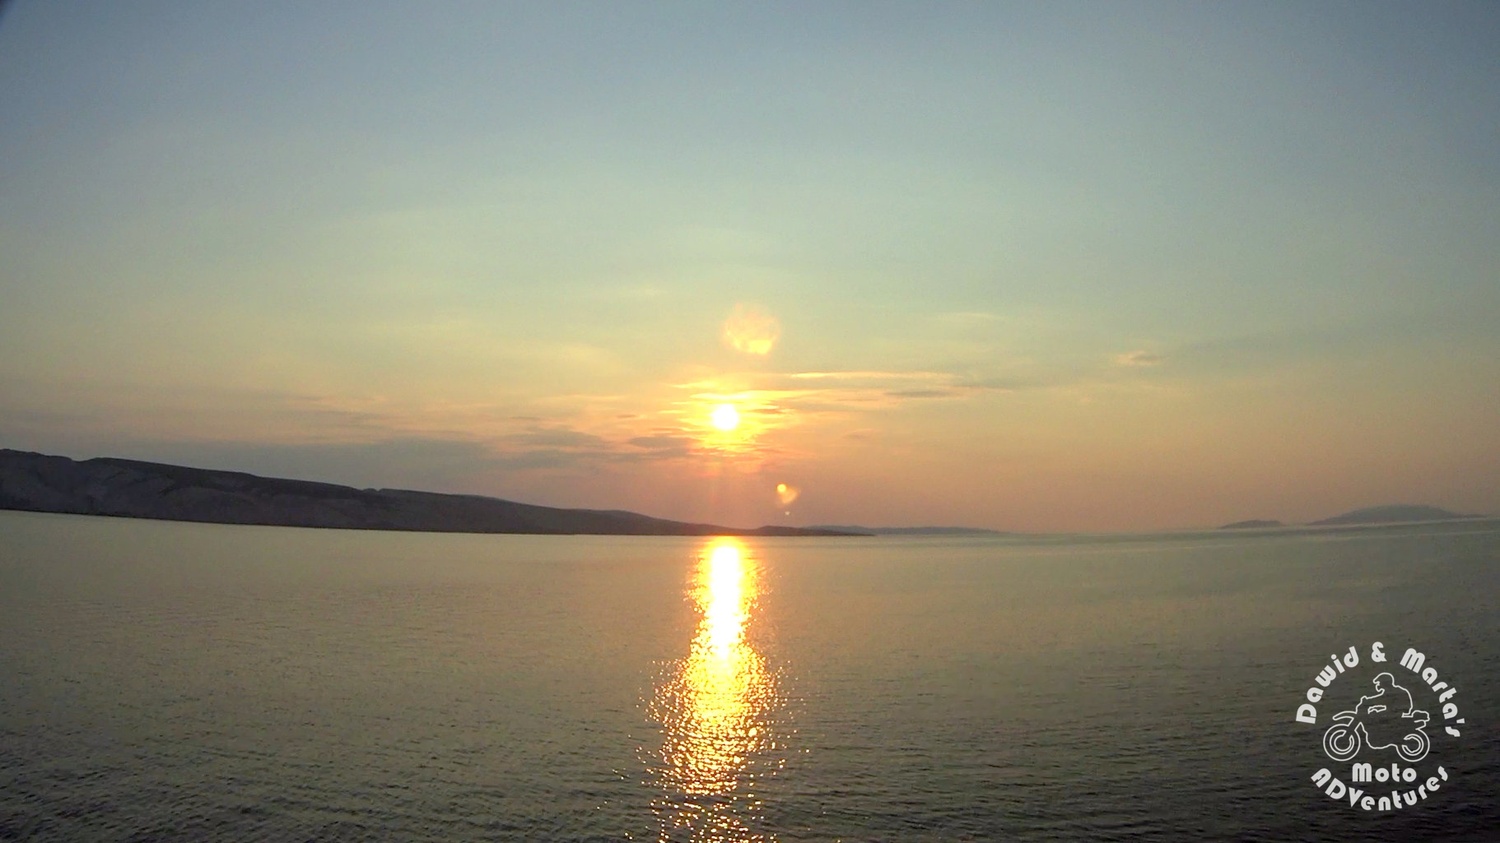 Sunset over the Adriatic Sea seen from the ferry crusing to the Pag Island.jpg